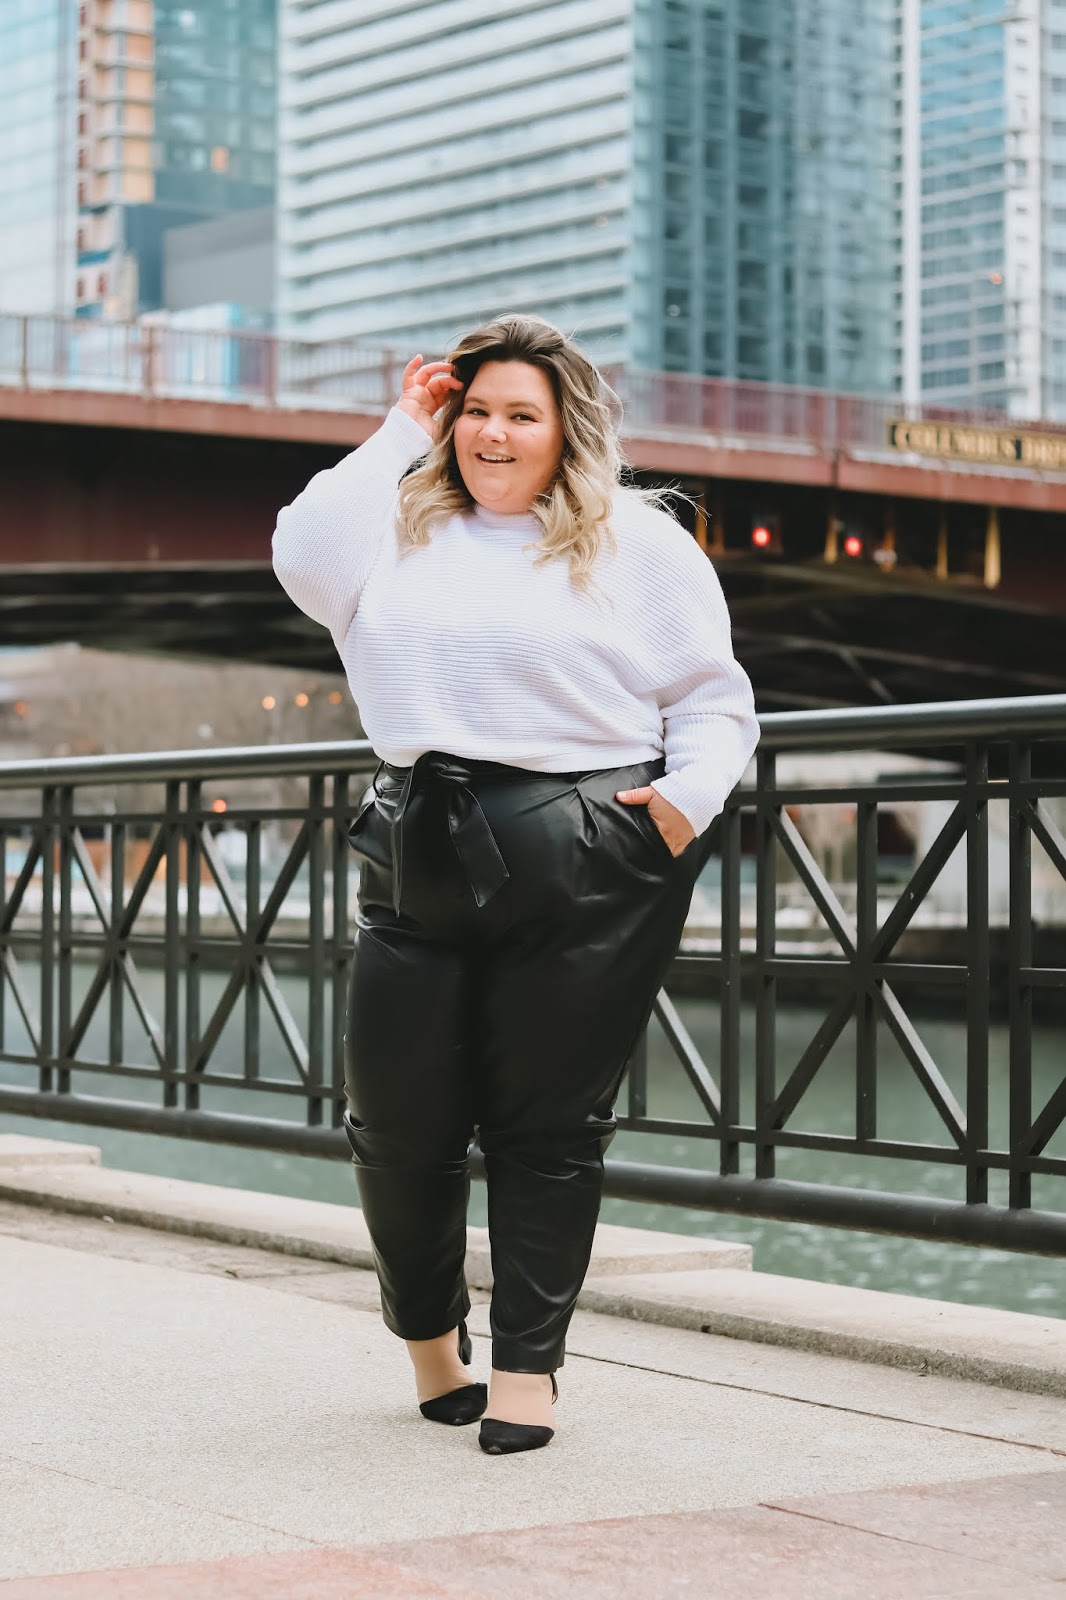 leather jogger outfit plus size｜TikTok Search